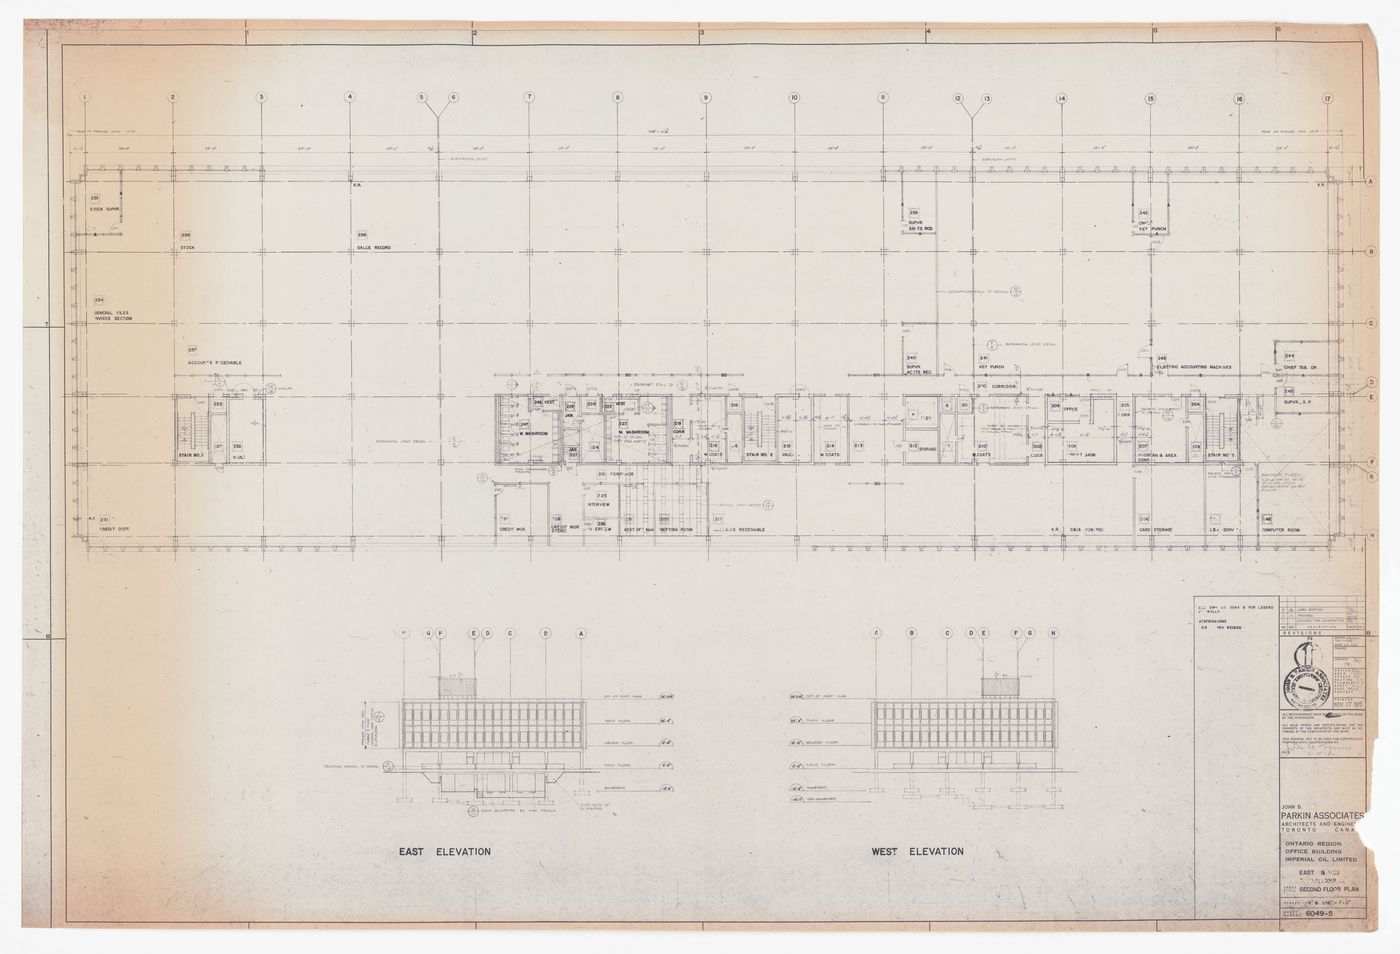 Construction second floor plan and east and west elevations for Imperial Oil Limited, Ontario Region Office Building, North York